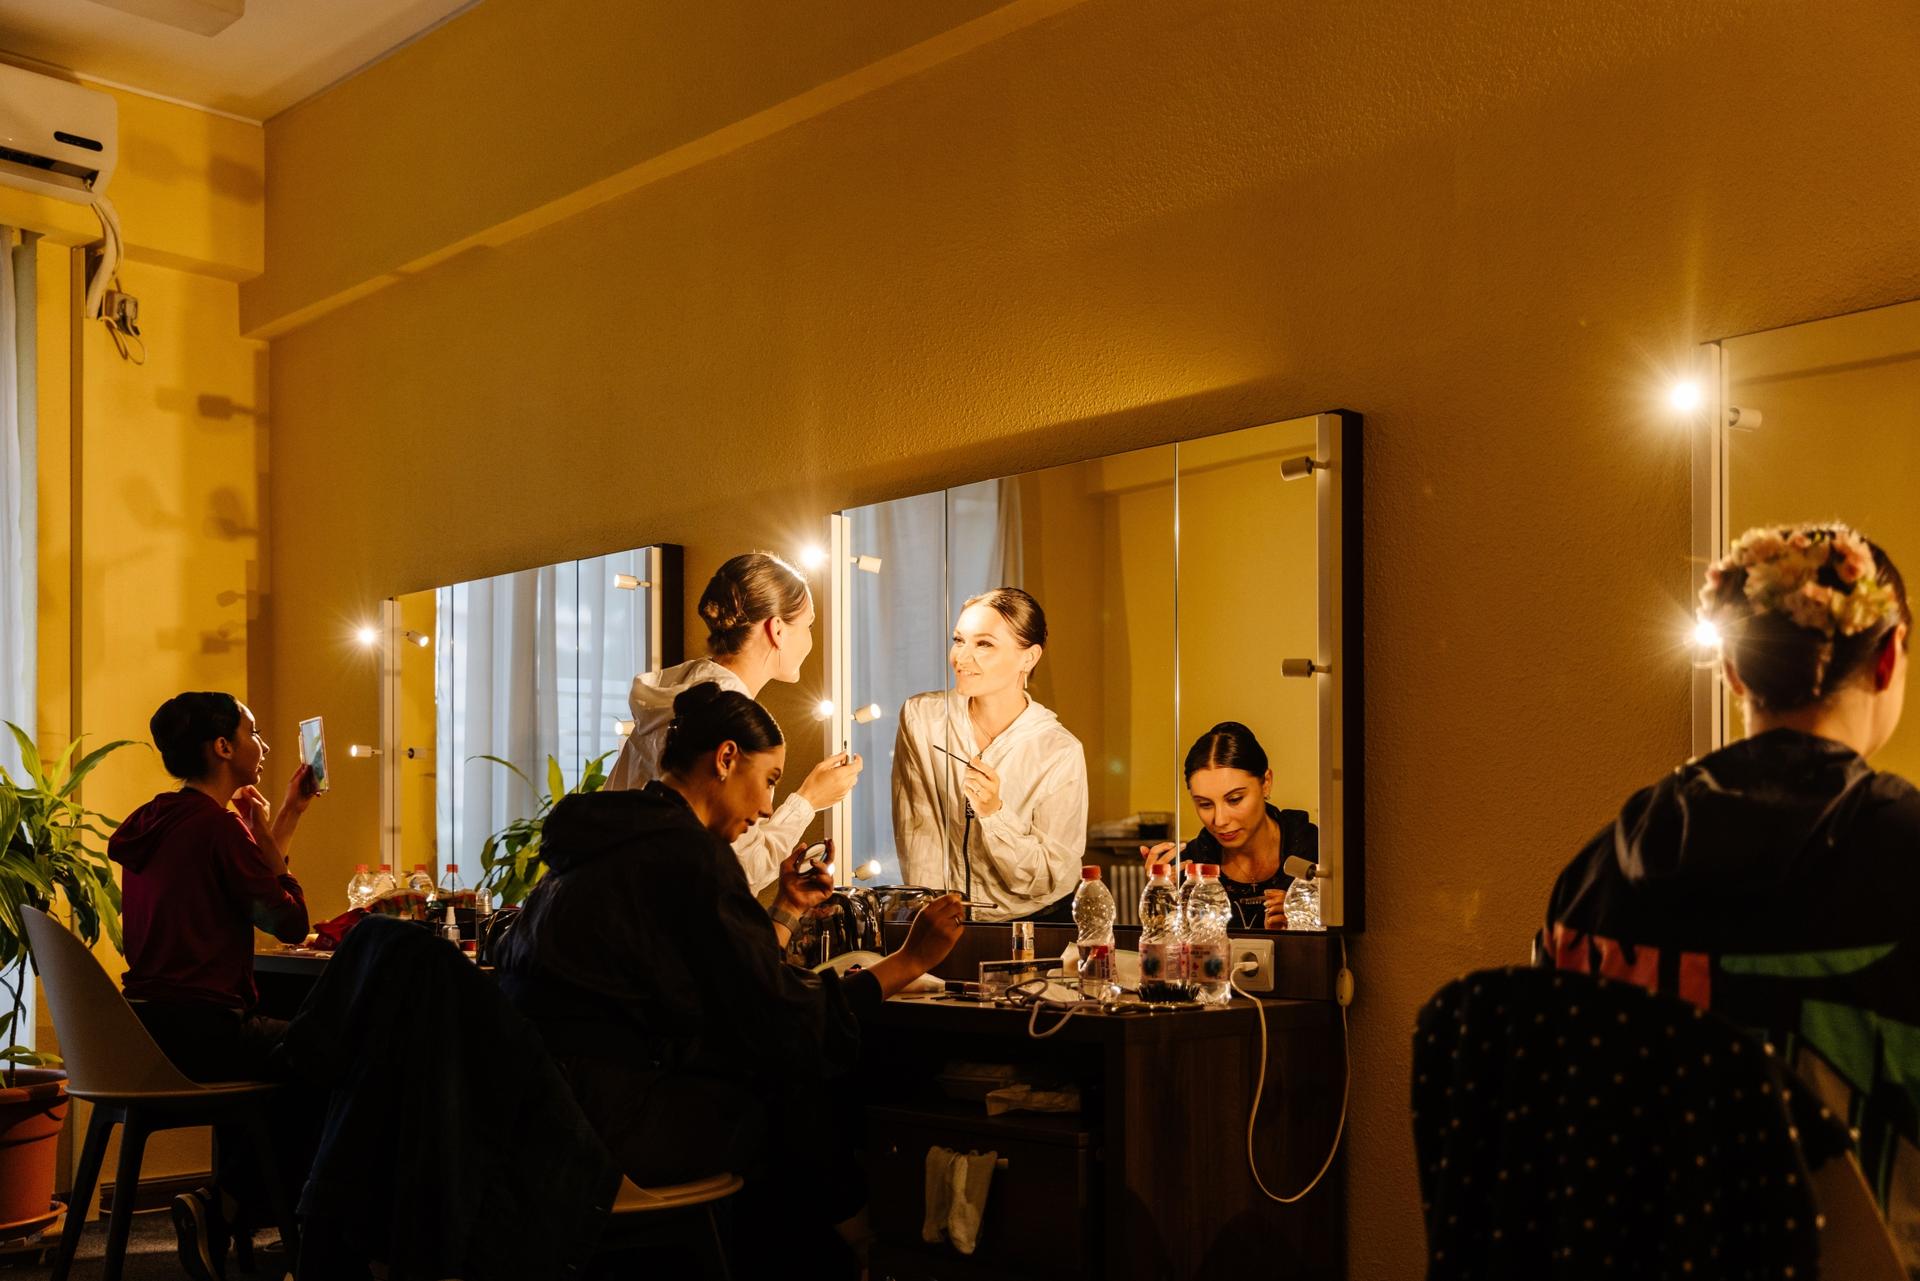 Ukrainian Classical Ballet dancers apply makeup in dressing room backstage before the performance in Bucharest, Romania.